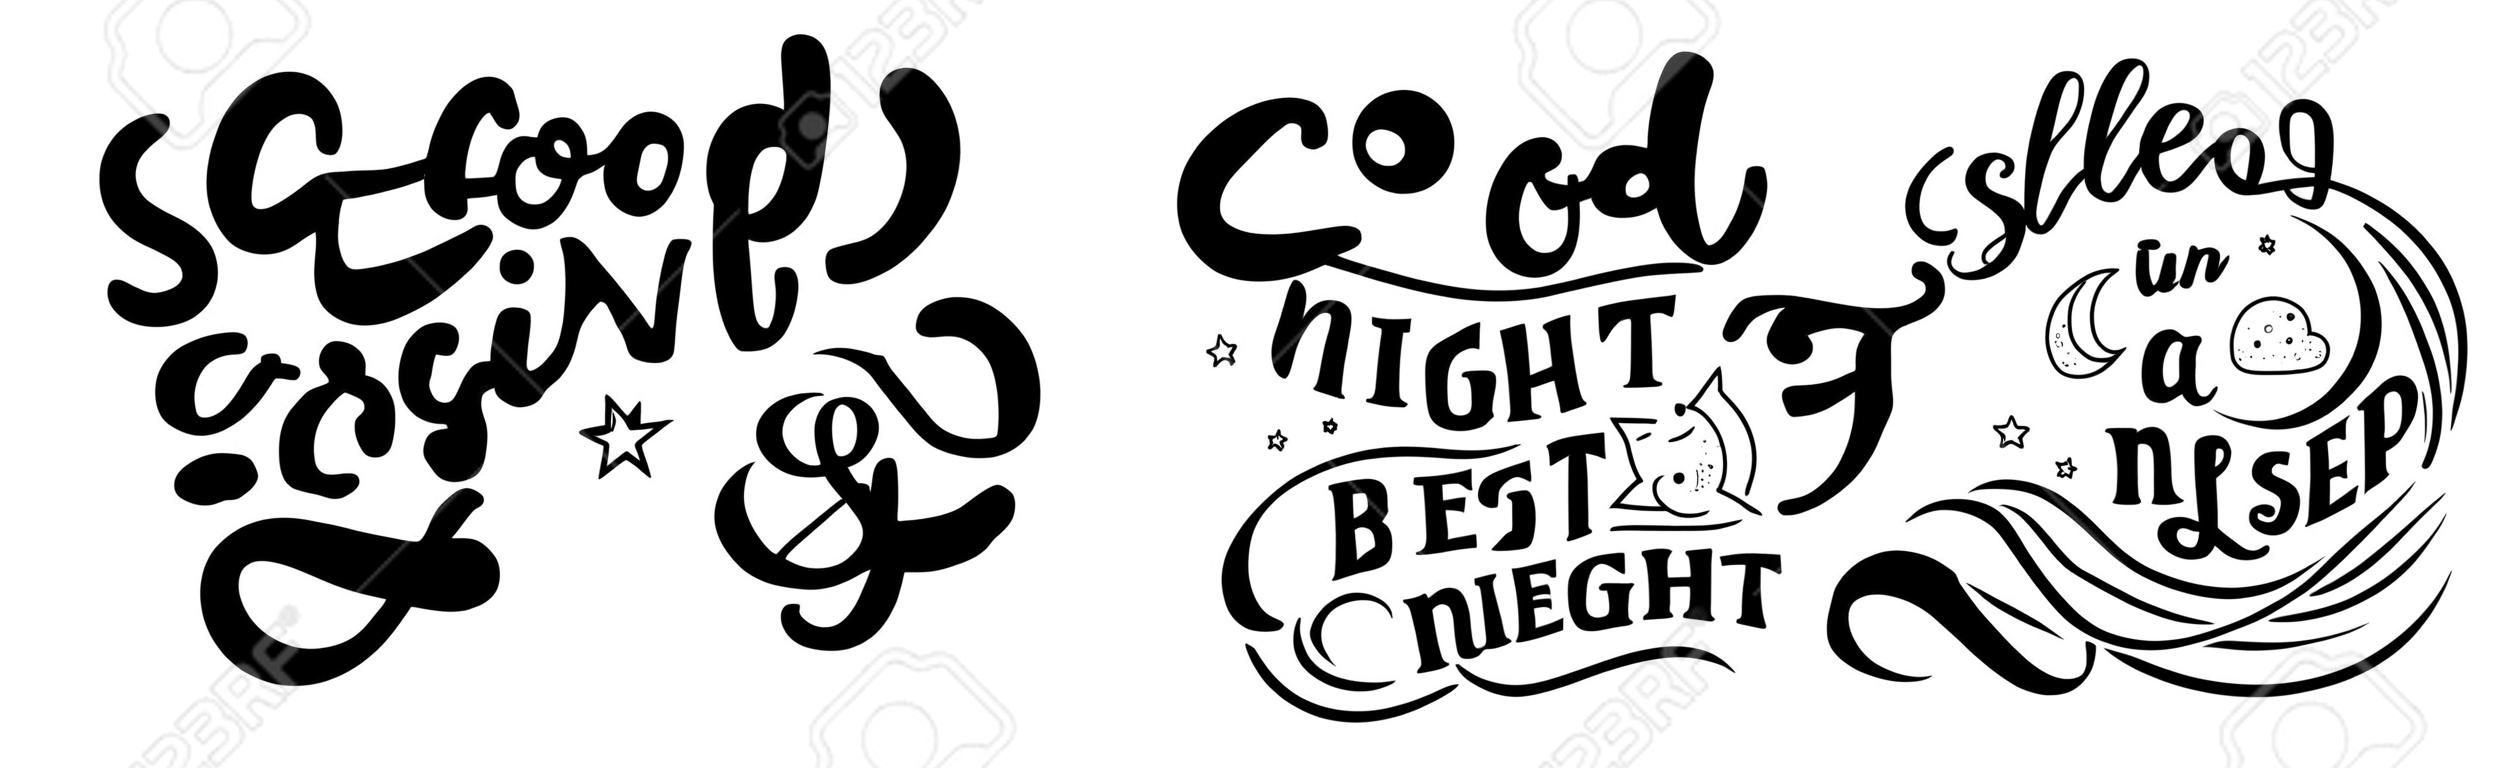 Lettering Slogan about sleep and good night. Vector illustration design for graphics, prints, posters, cards, stickers and other creative uses